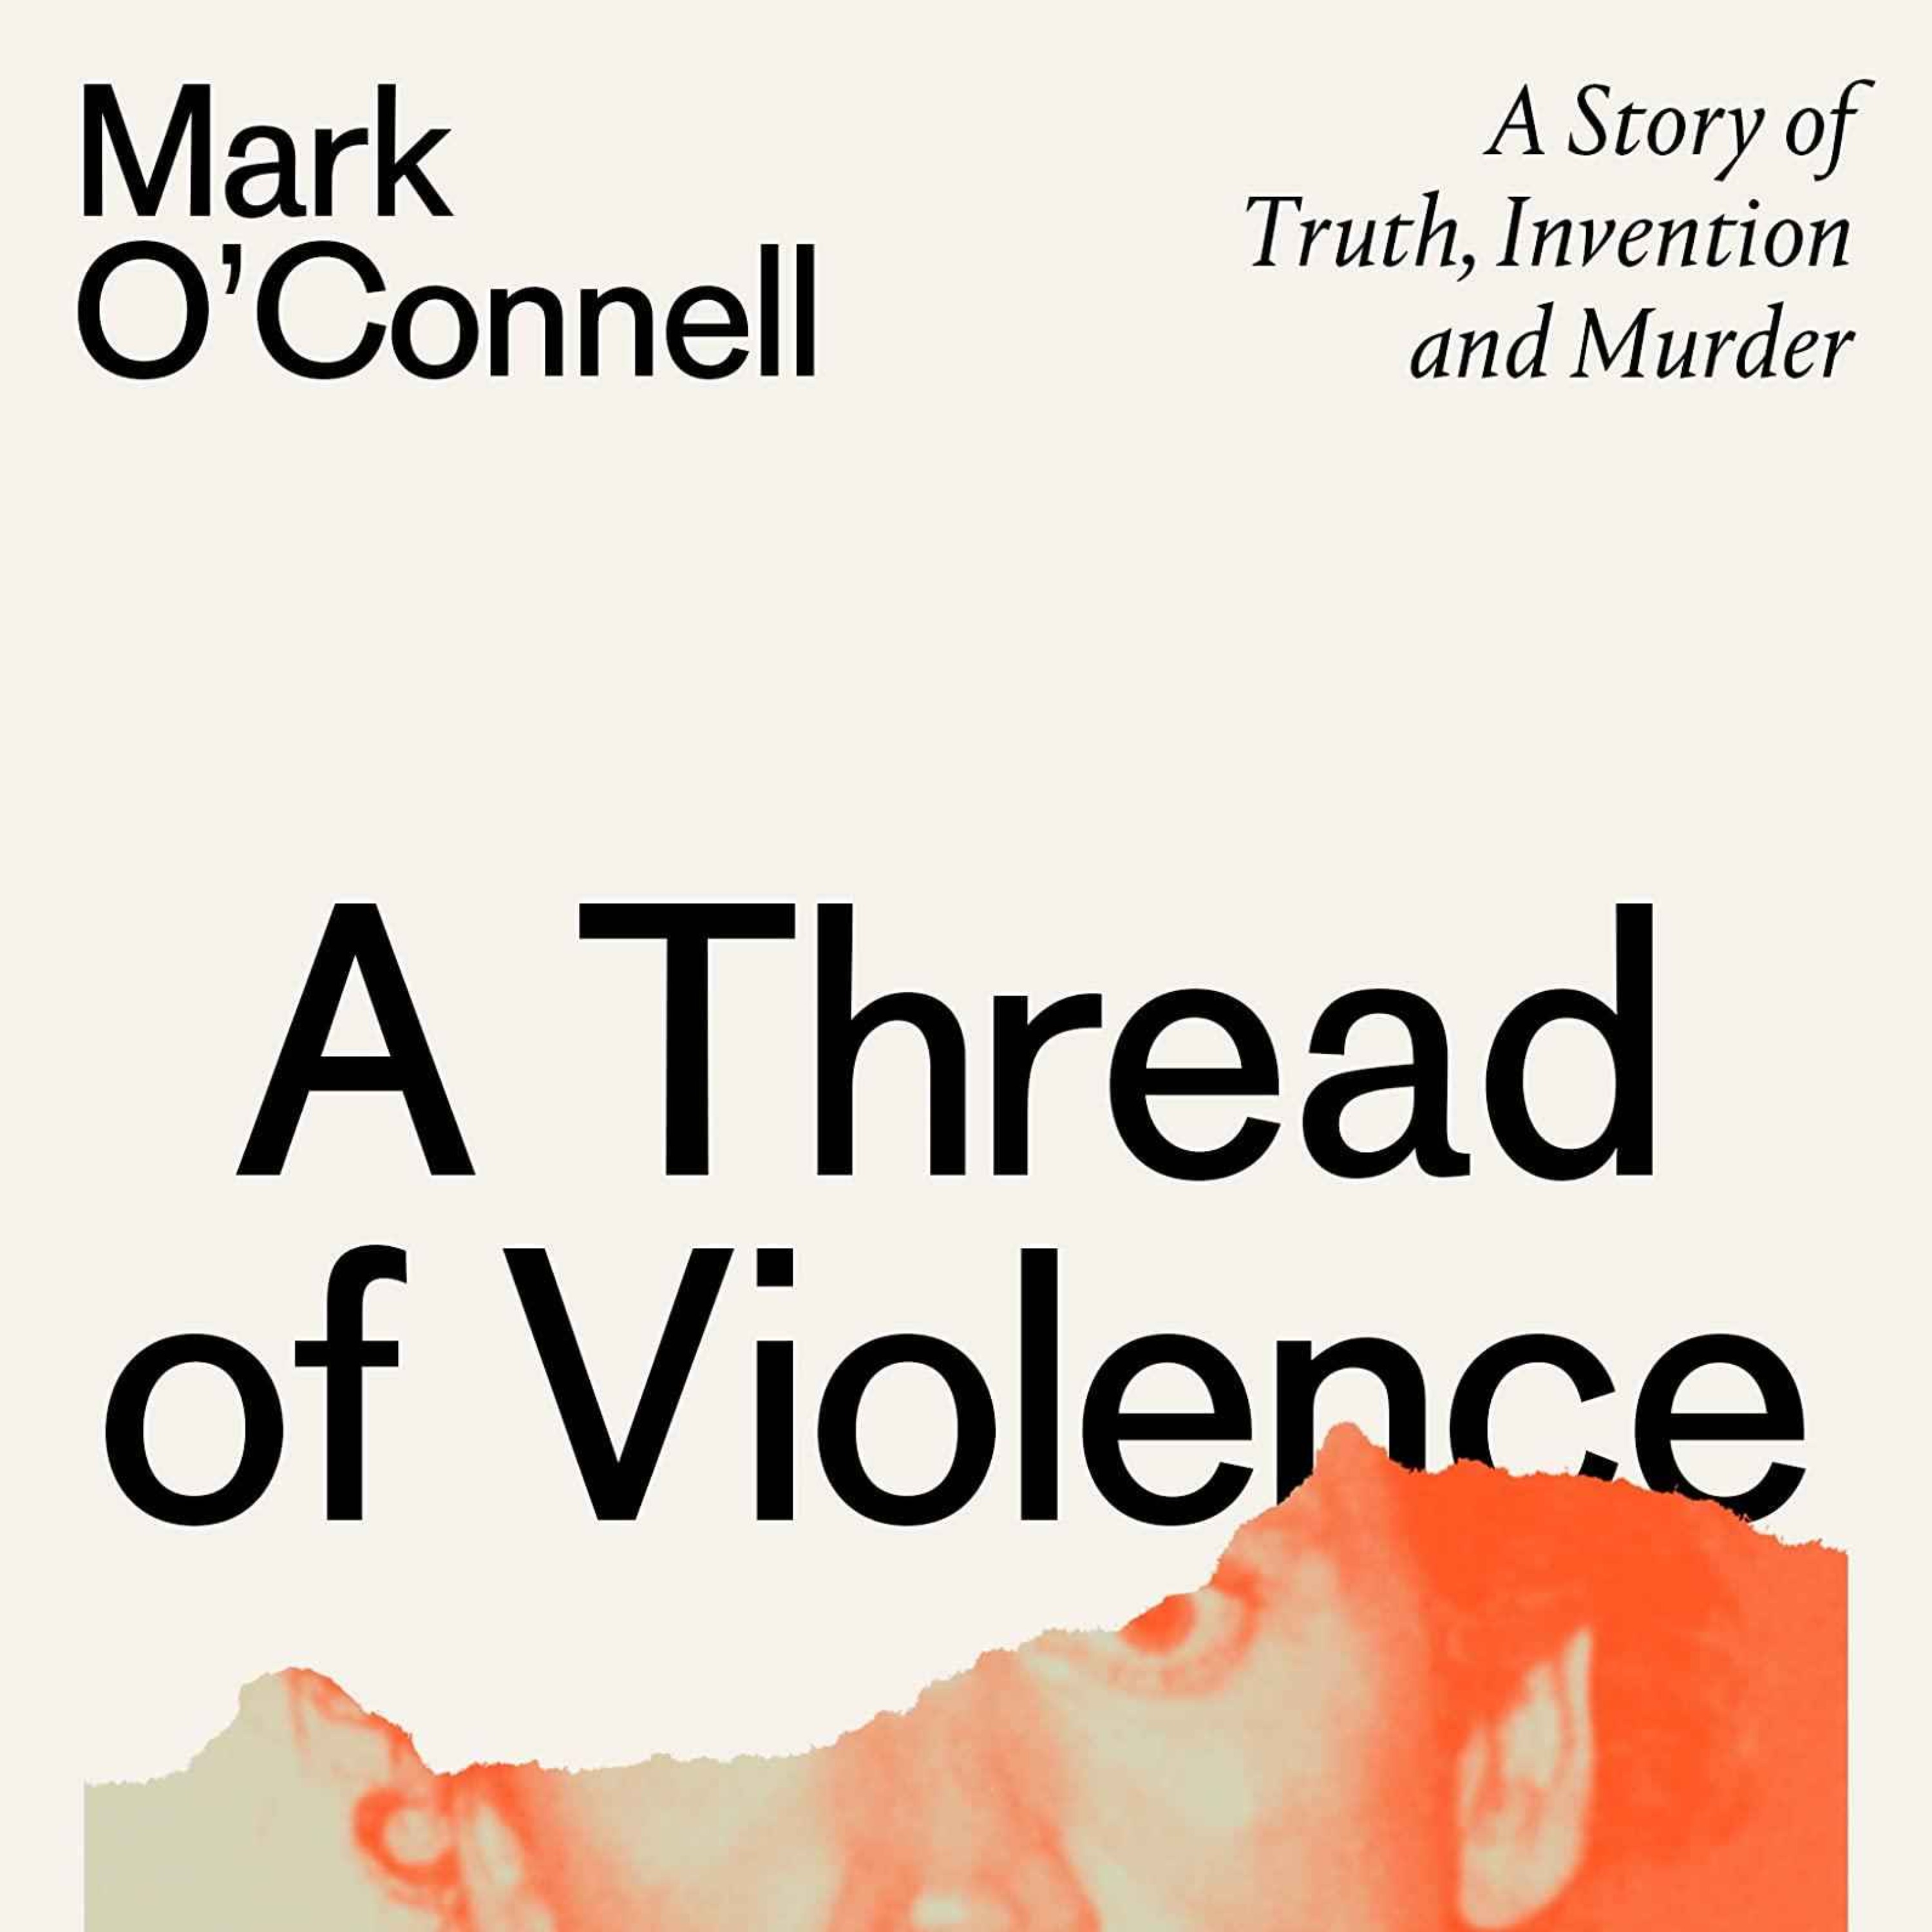 Little Atoms 839 - Mark O'Connell's A Thread of Violence